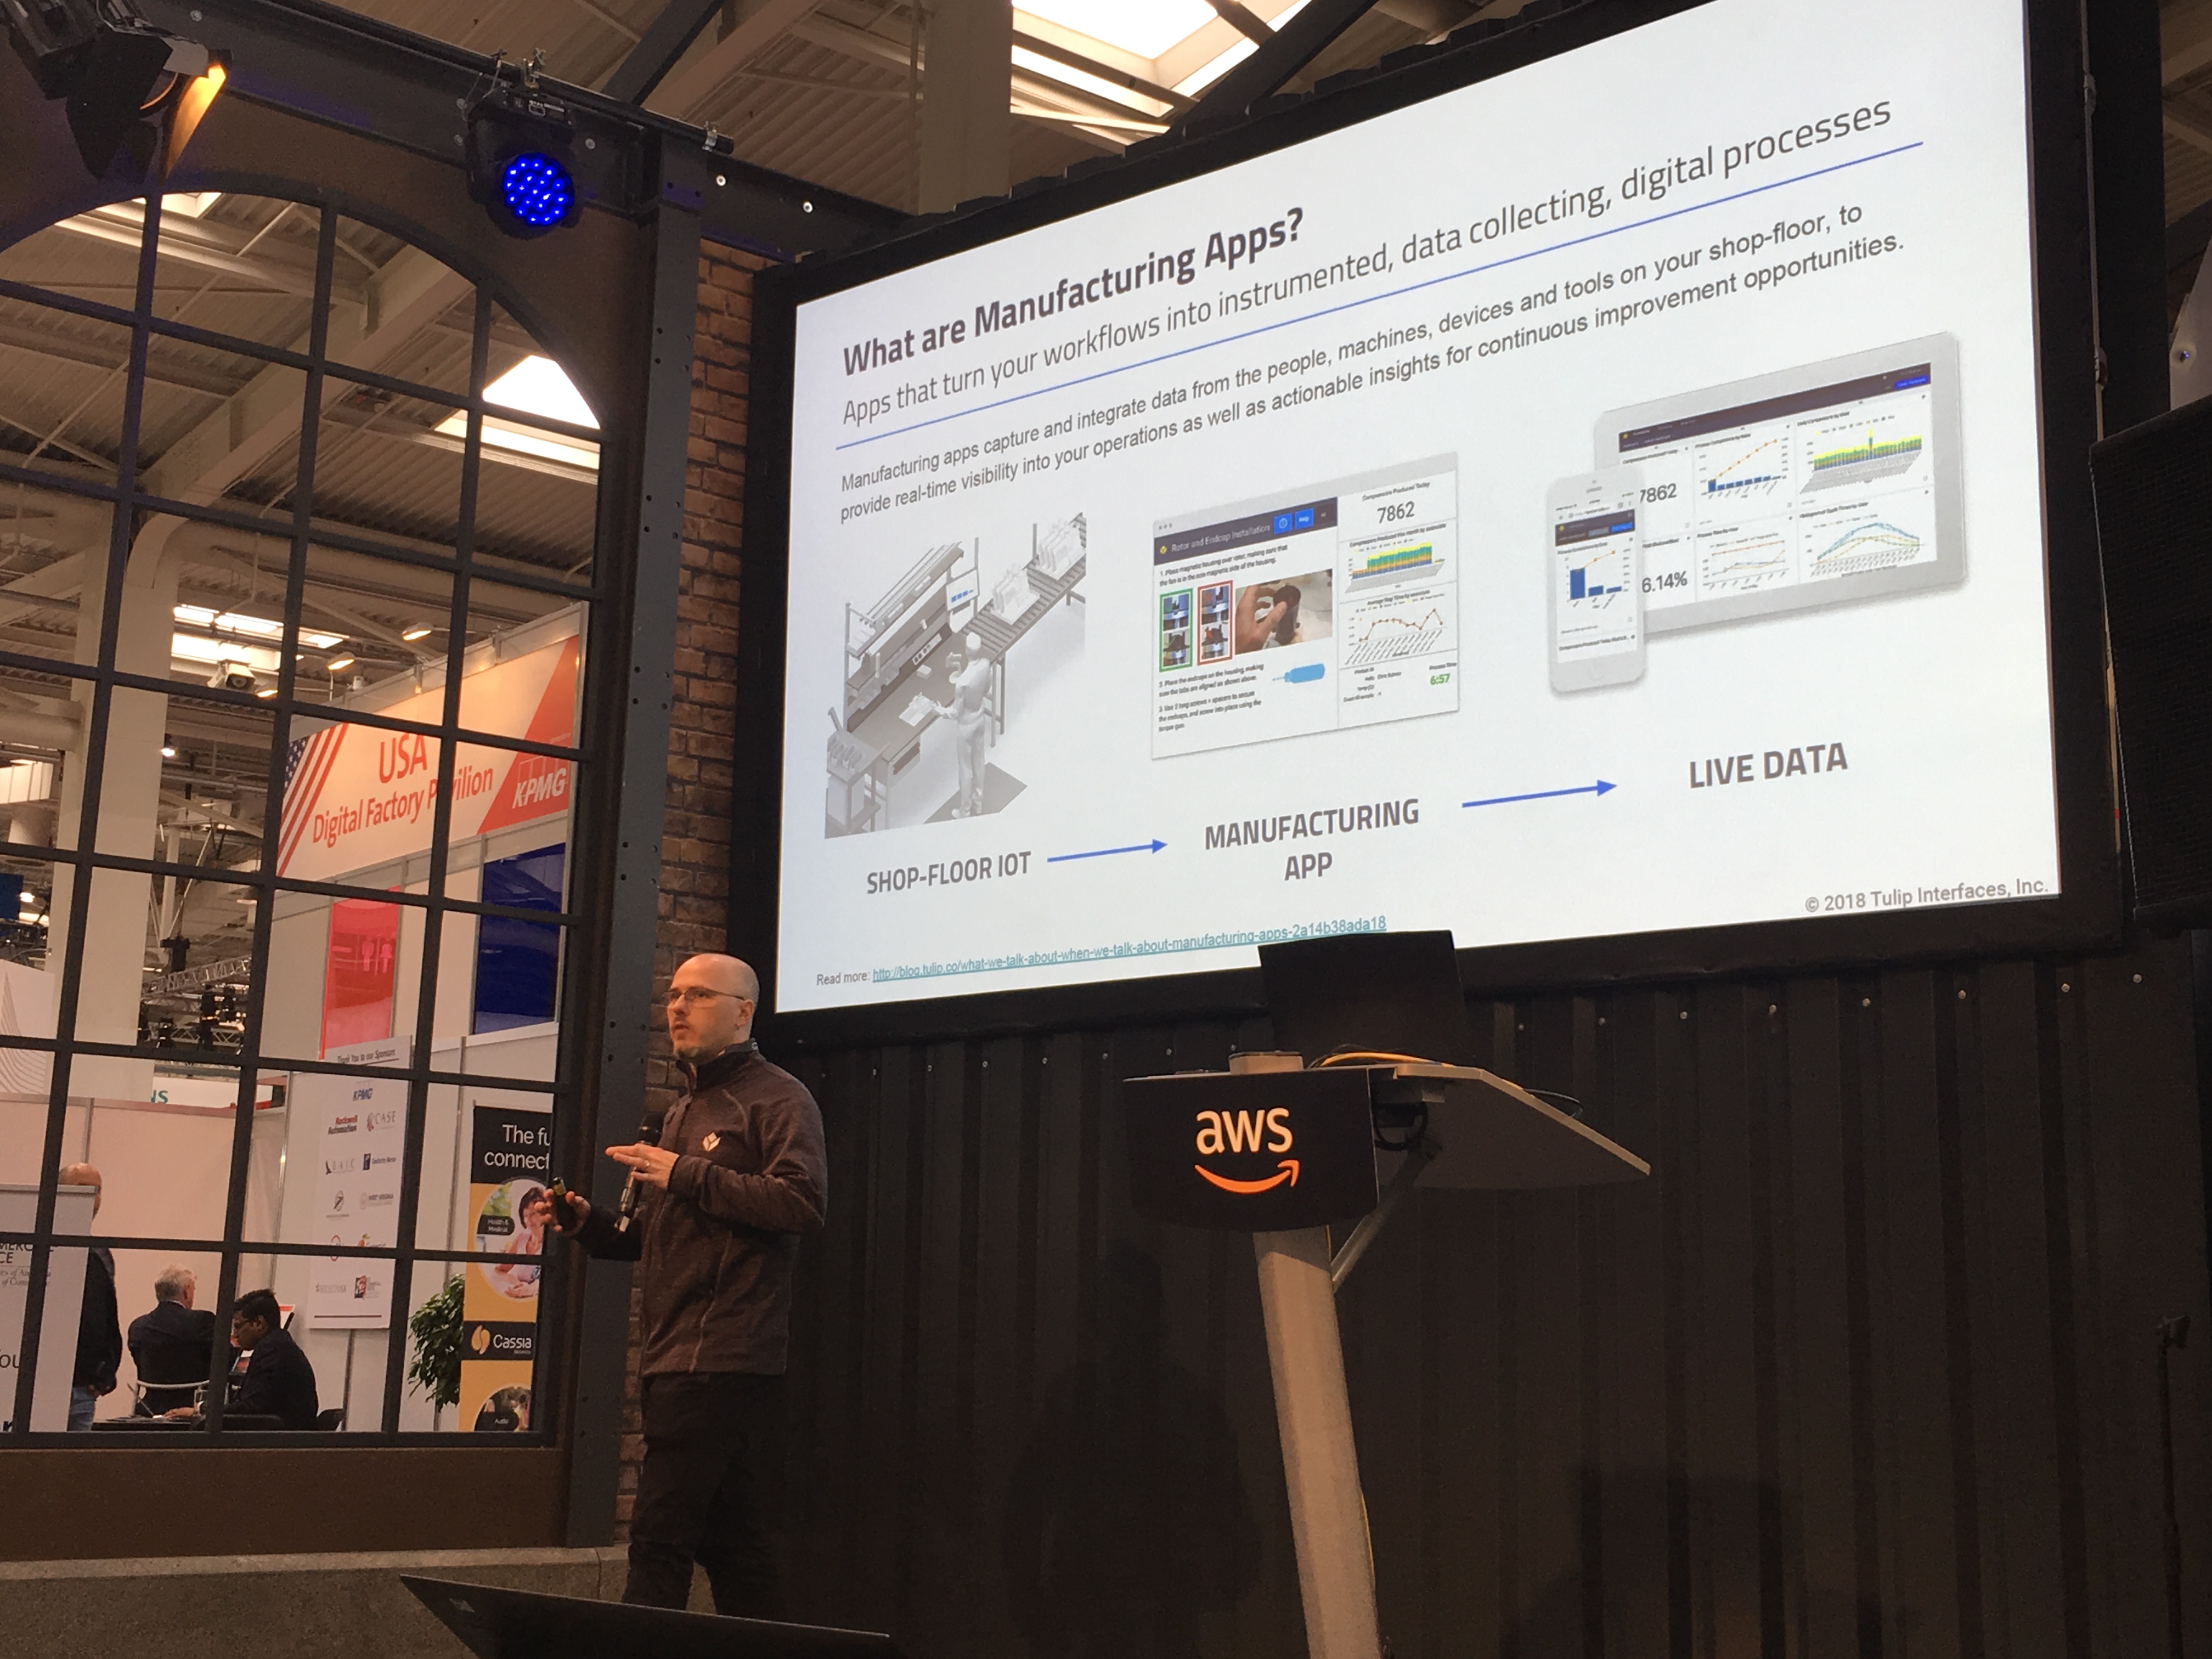 Rony Kubat, Tulip's Co-founder, delivering a lecture at the AWS Pavilion in Hannover Messe